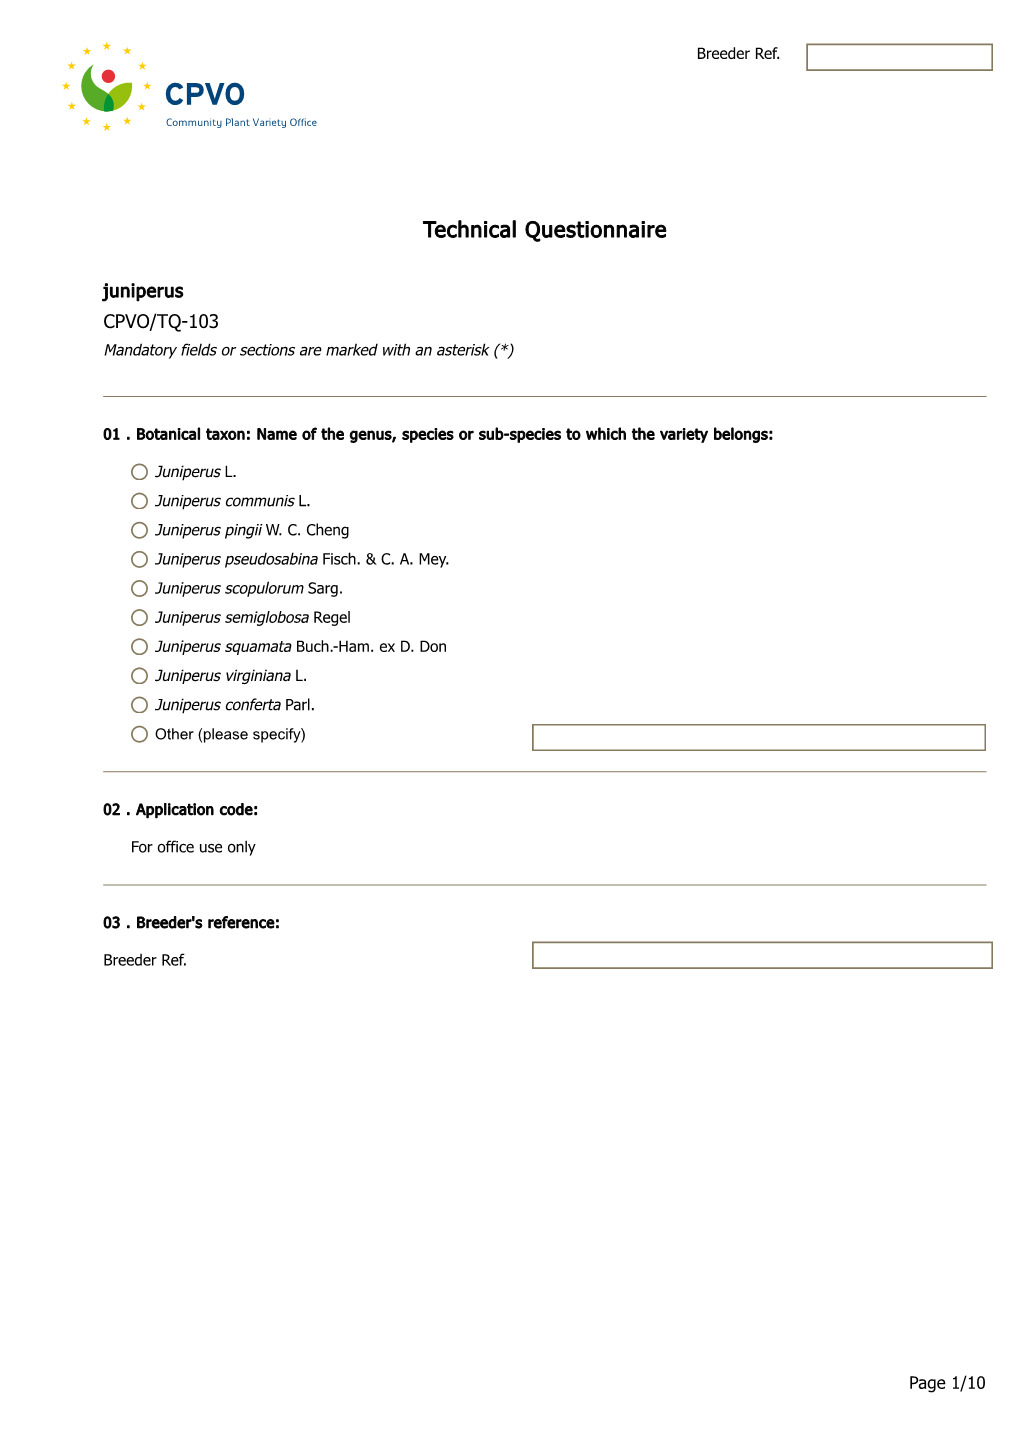 Technical Questionnaire Juniperus CPVO/TQ-103 Mandatory Fields Or Sections Are Marked with an Asterisk (*)